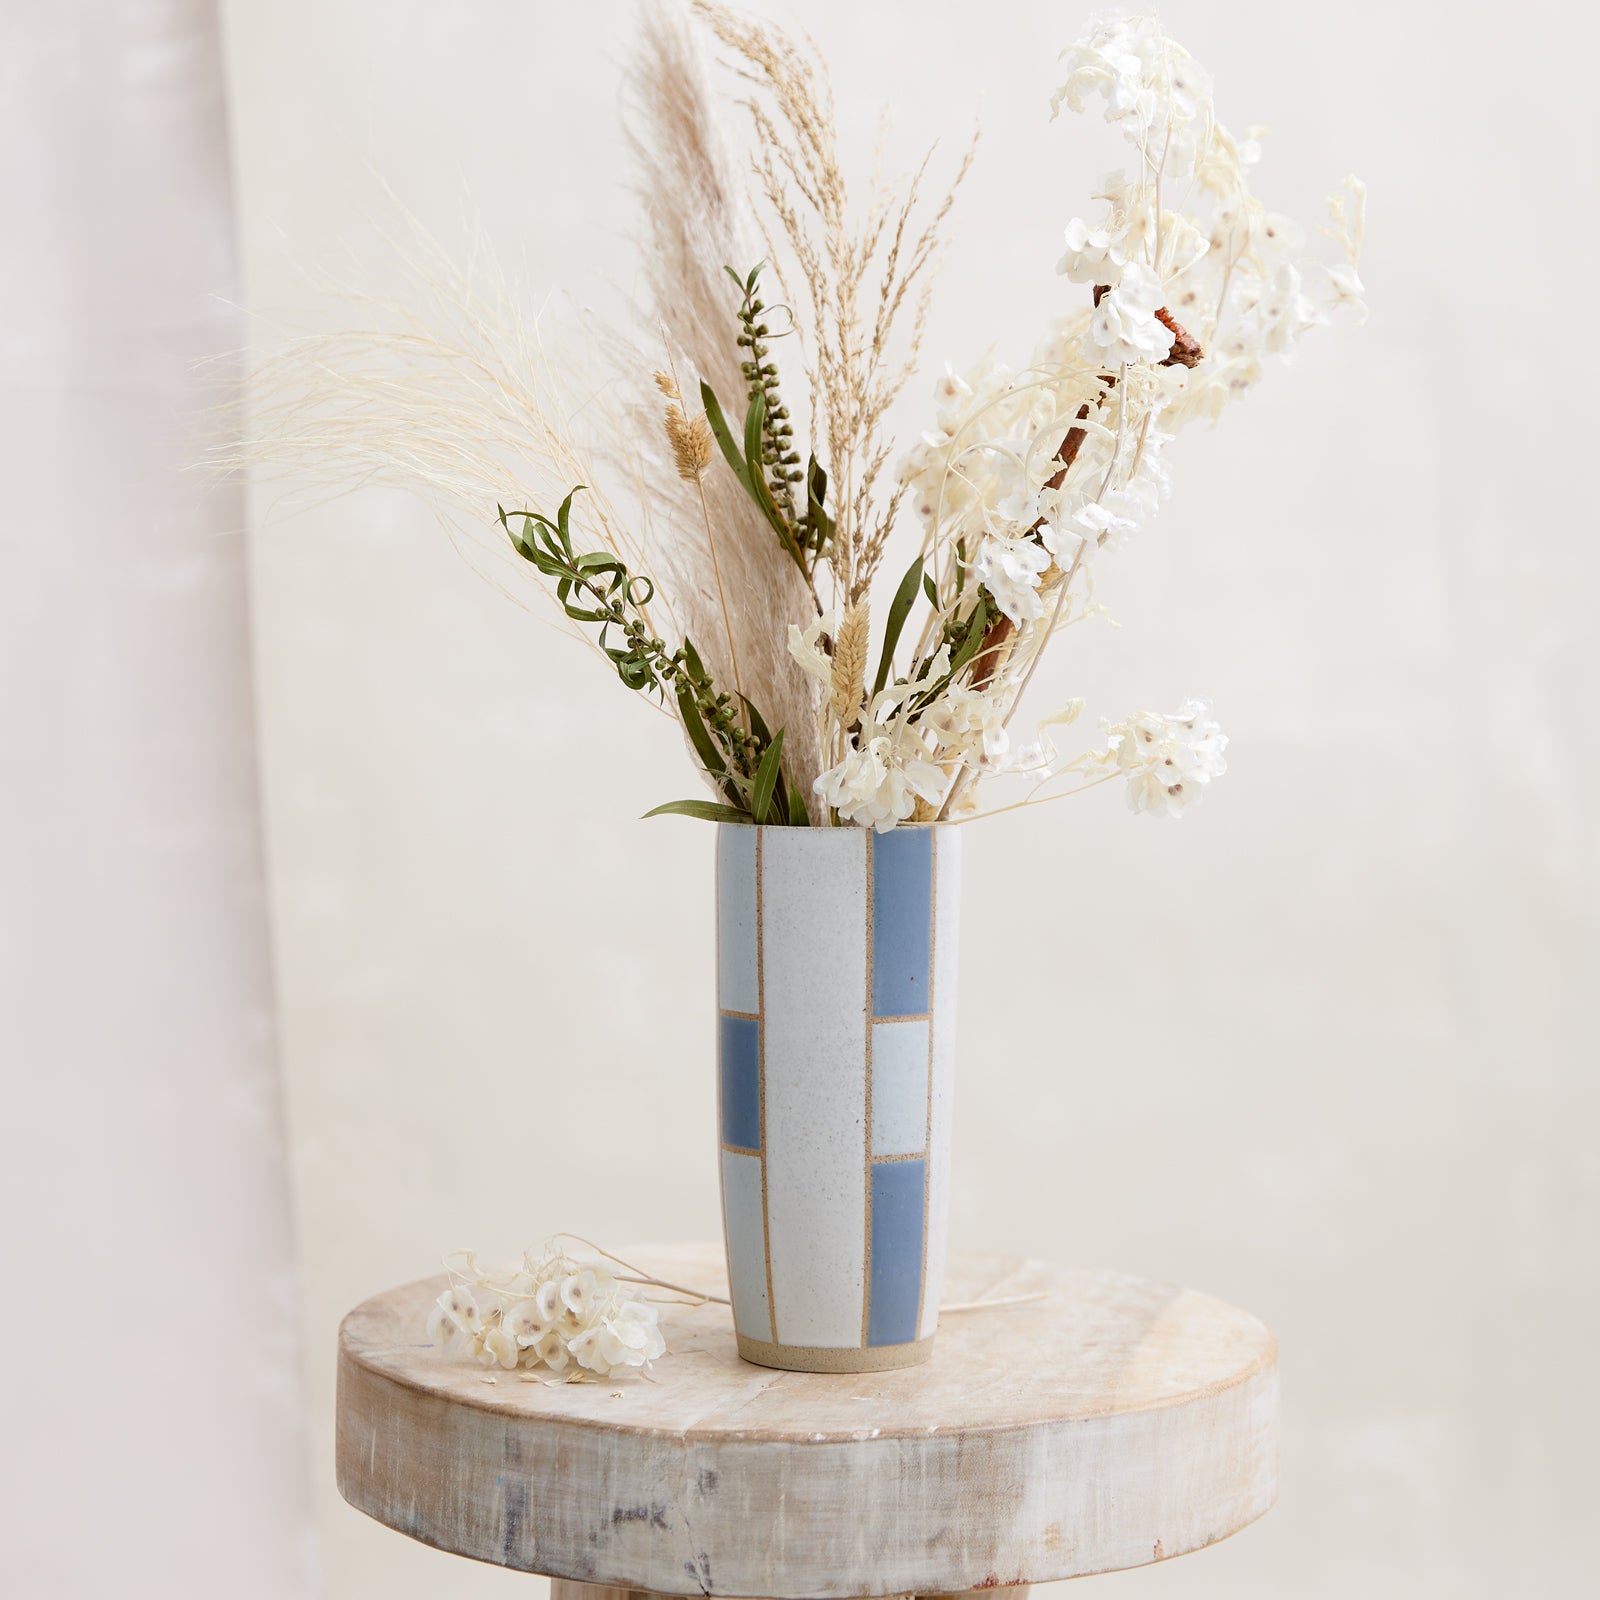 A front view of the Geometric Tapered Handmade Ceramic Vase in dark blue and grey glaze. The ceramic vase sits on a wooden stool holding dried flowers. The handmade vase is in a coastal-styled setting.